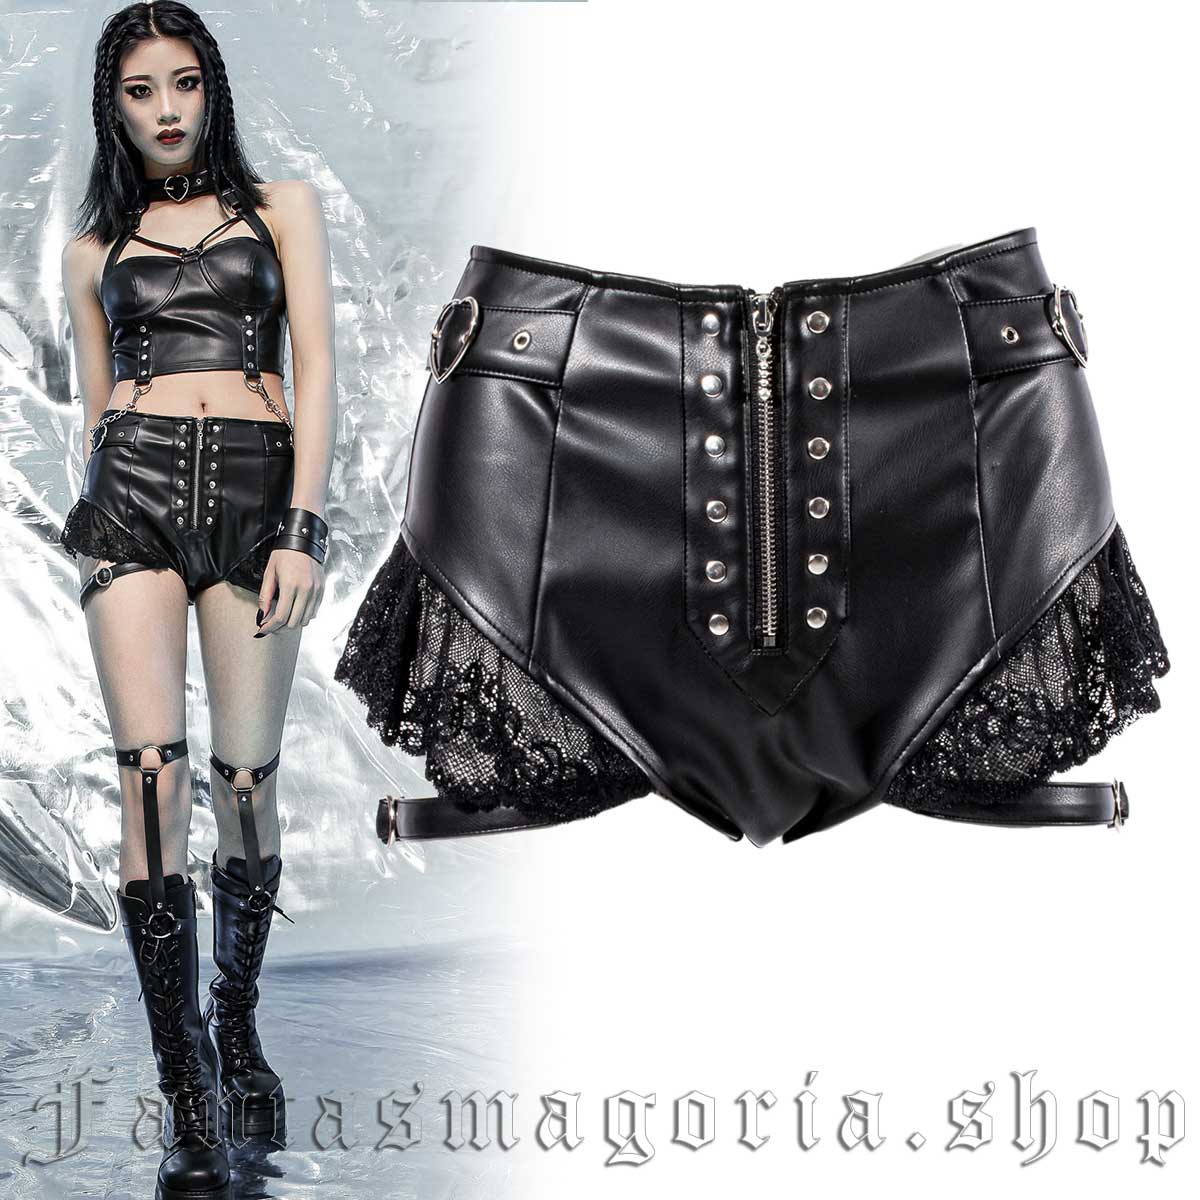 Women's Gothic faux leather strap detail frill trim hotpants shorts. - RNG - SE012DN